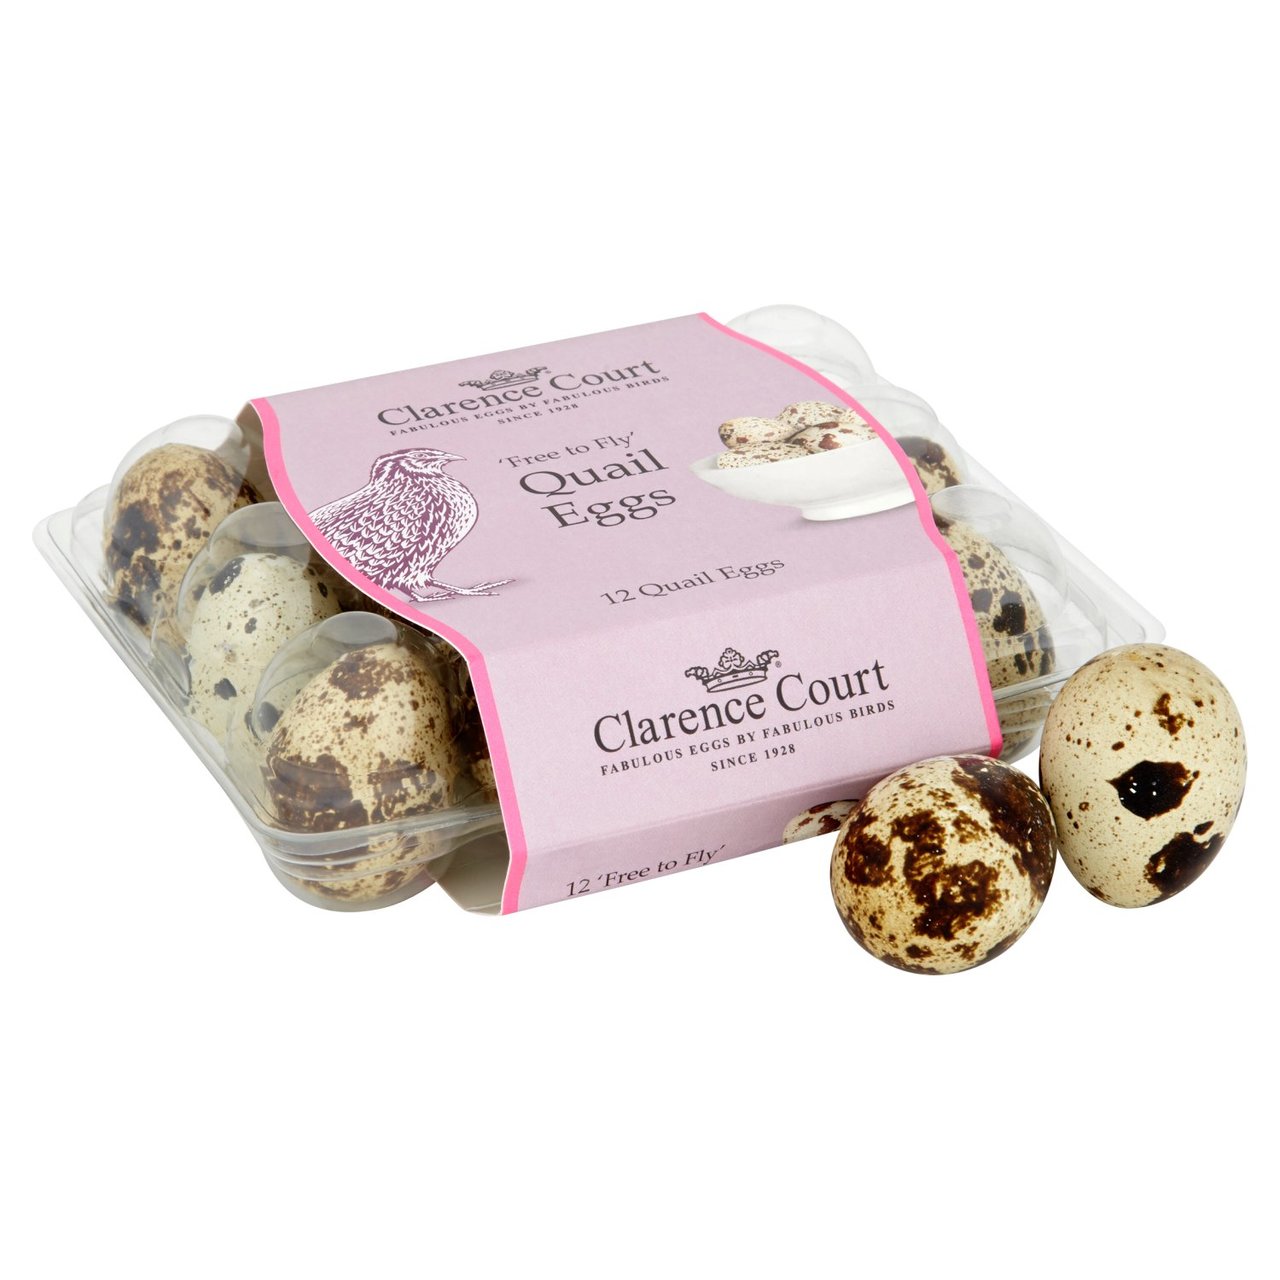 Clarence Court Quail Eggs 12 per pack